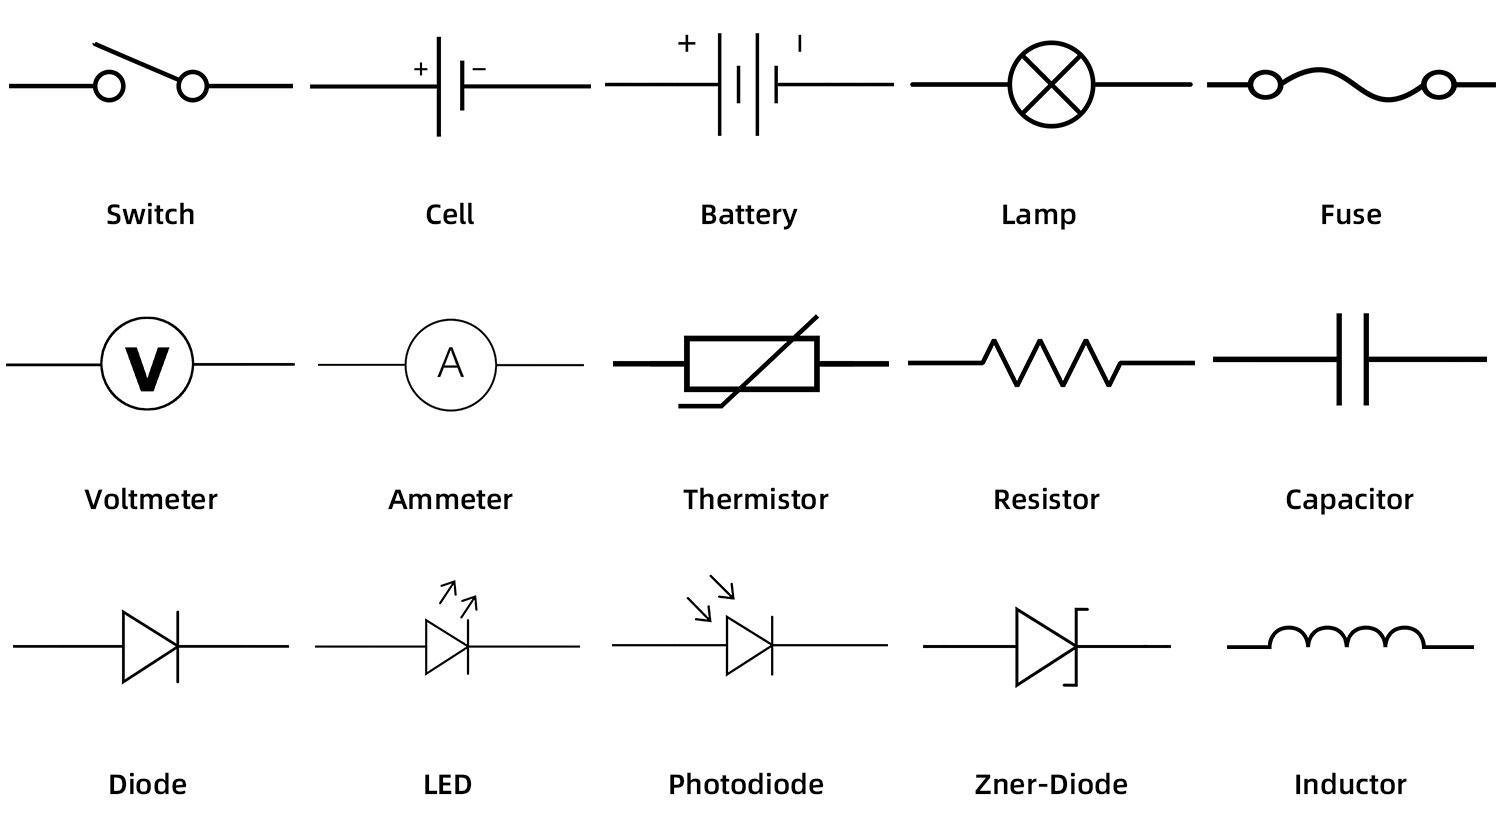 Electrical & Electronic Symbols: A Basic with -